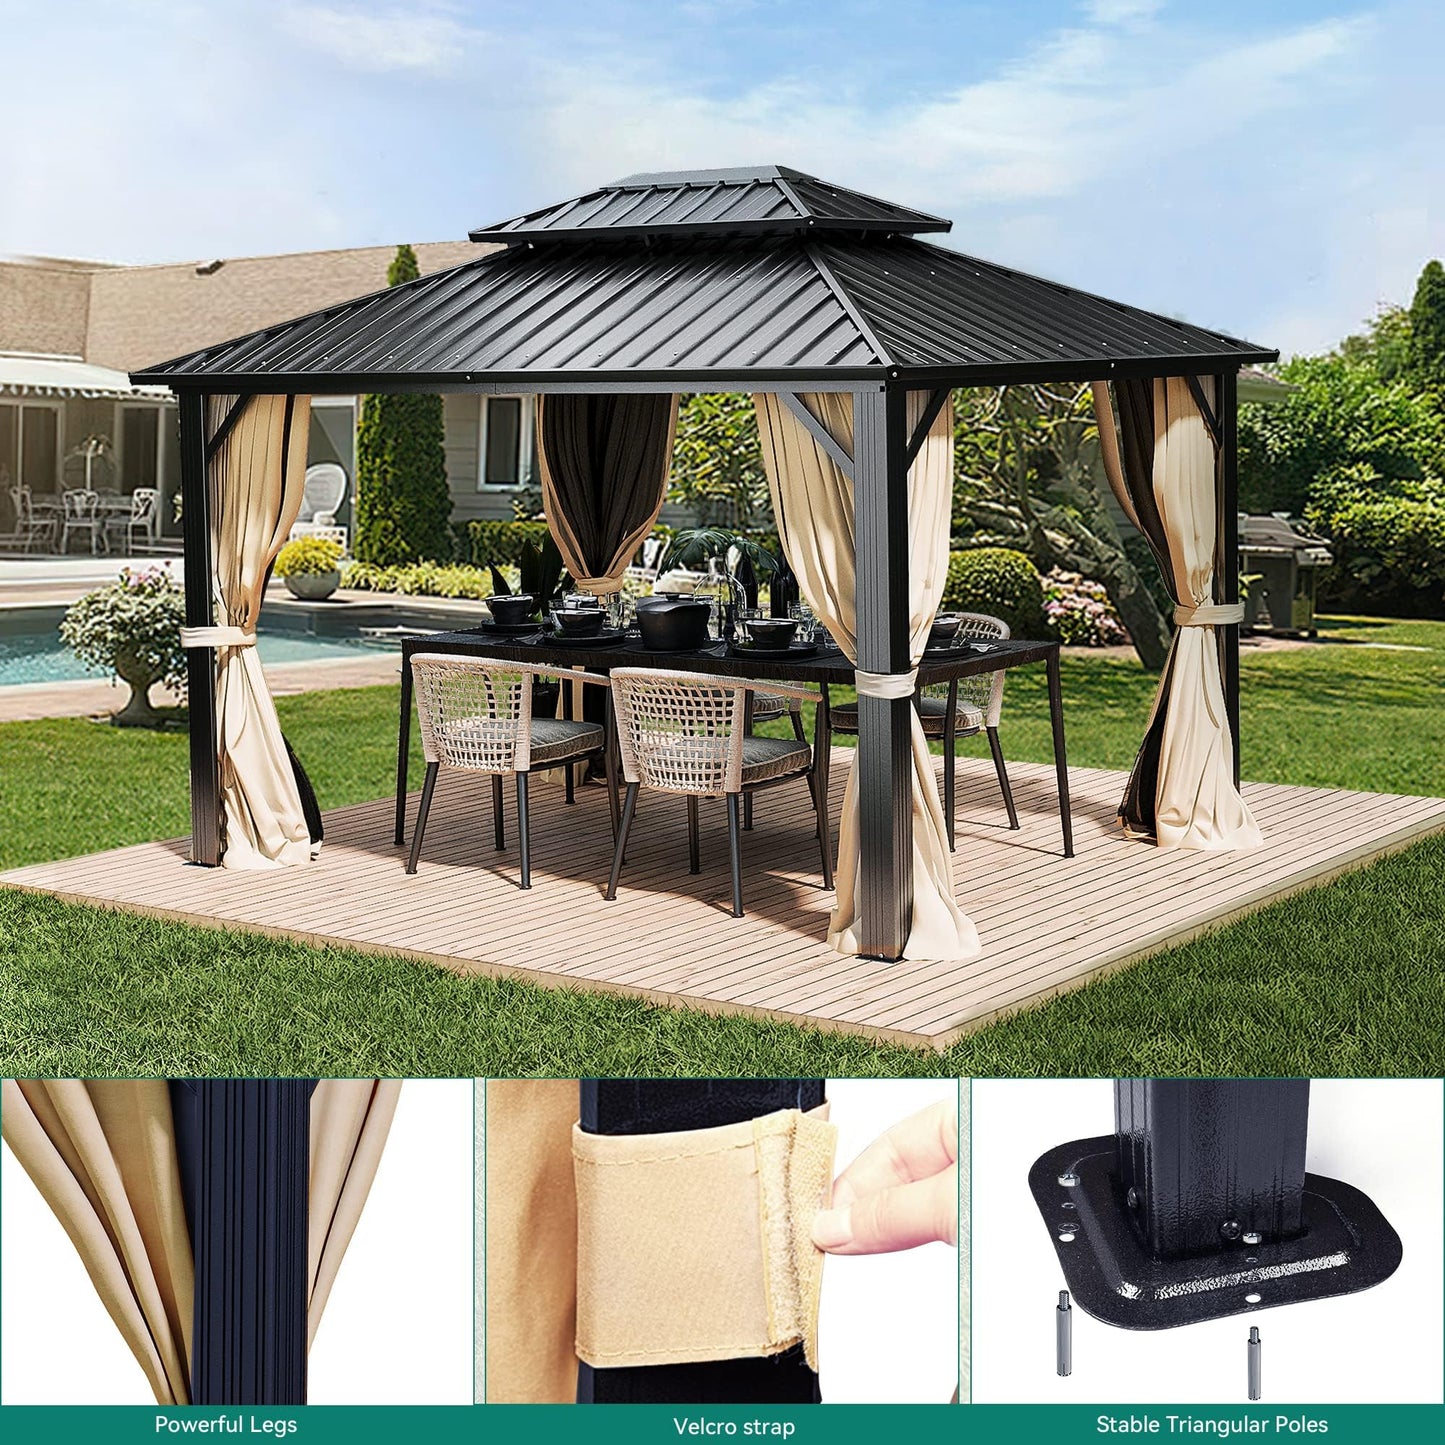 YITAHOME 10x12ft Gazebo Double Roof Canopy with Netting and Curtains, Outdoor Gazebo 2-Tier Hardtop Galvanized Iron Aluminum Frame Garden Tent for Patio, Backyard, Deck and Lawns